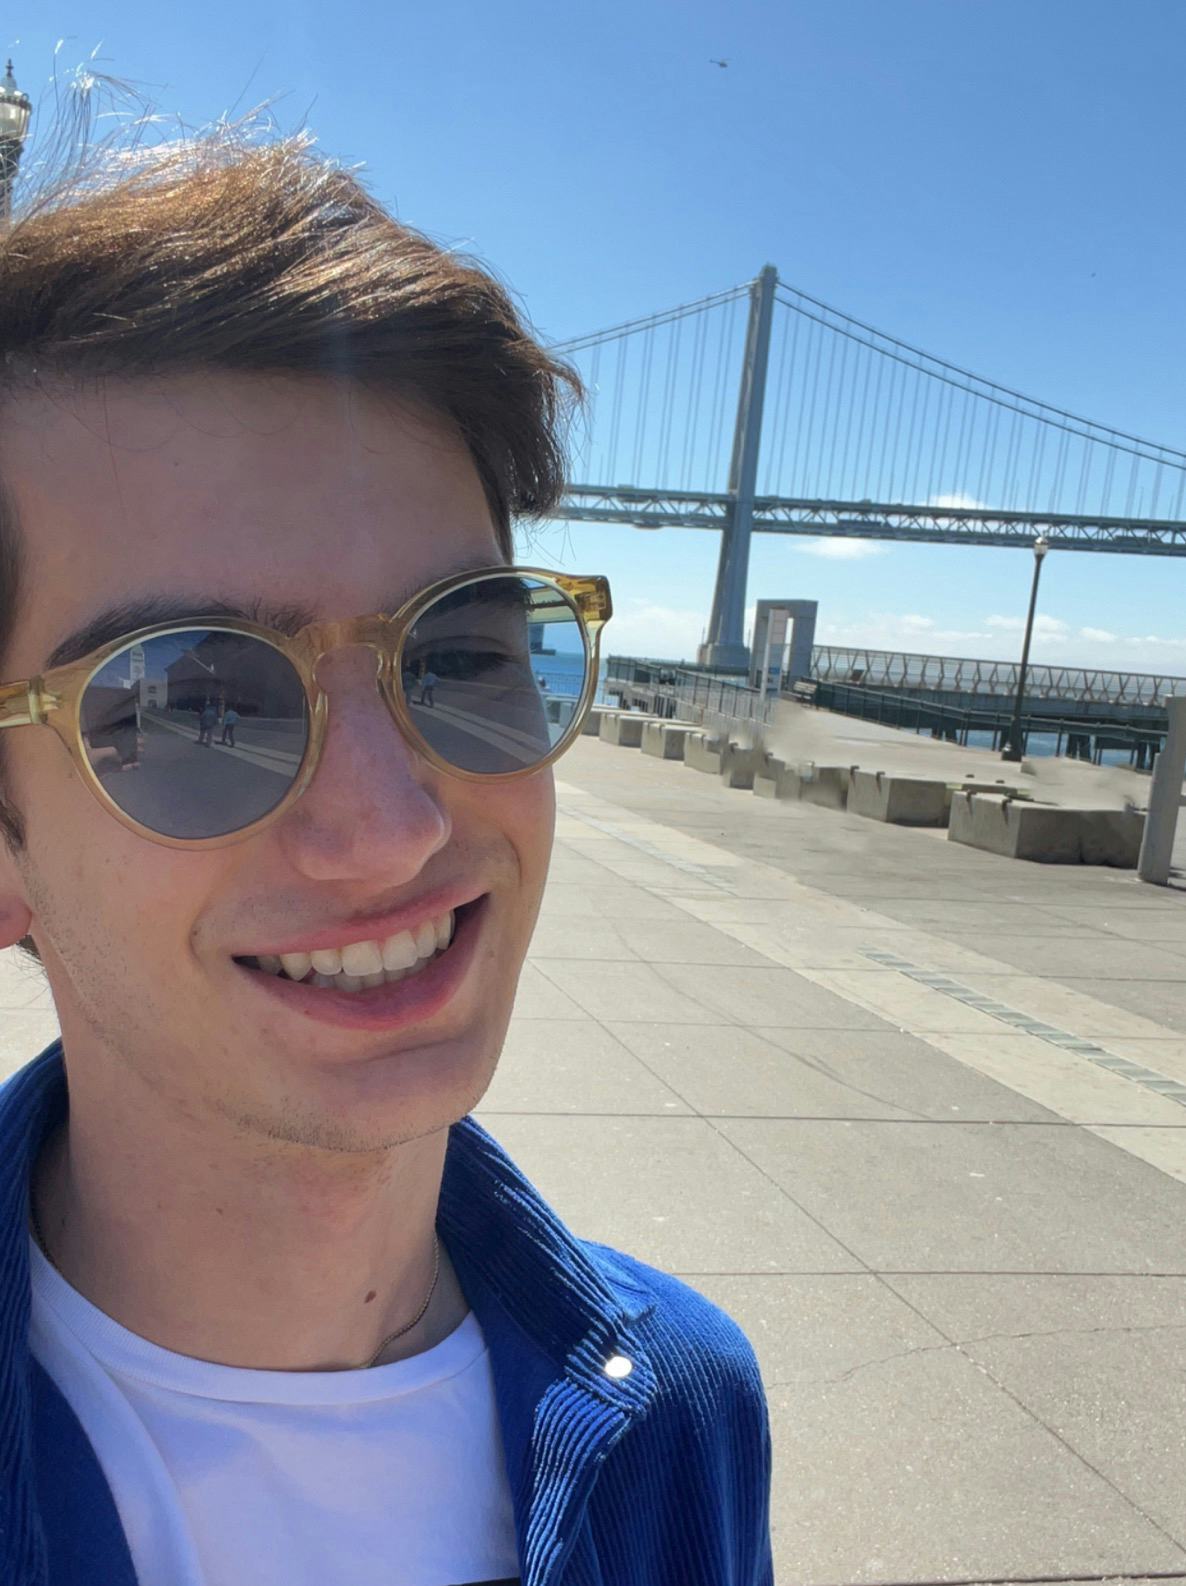 Me smiling wearing a deep blue curduroy shirt and yellow oversized round sunglasses in front of the Bay Bridge.